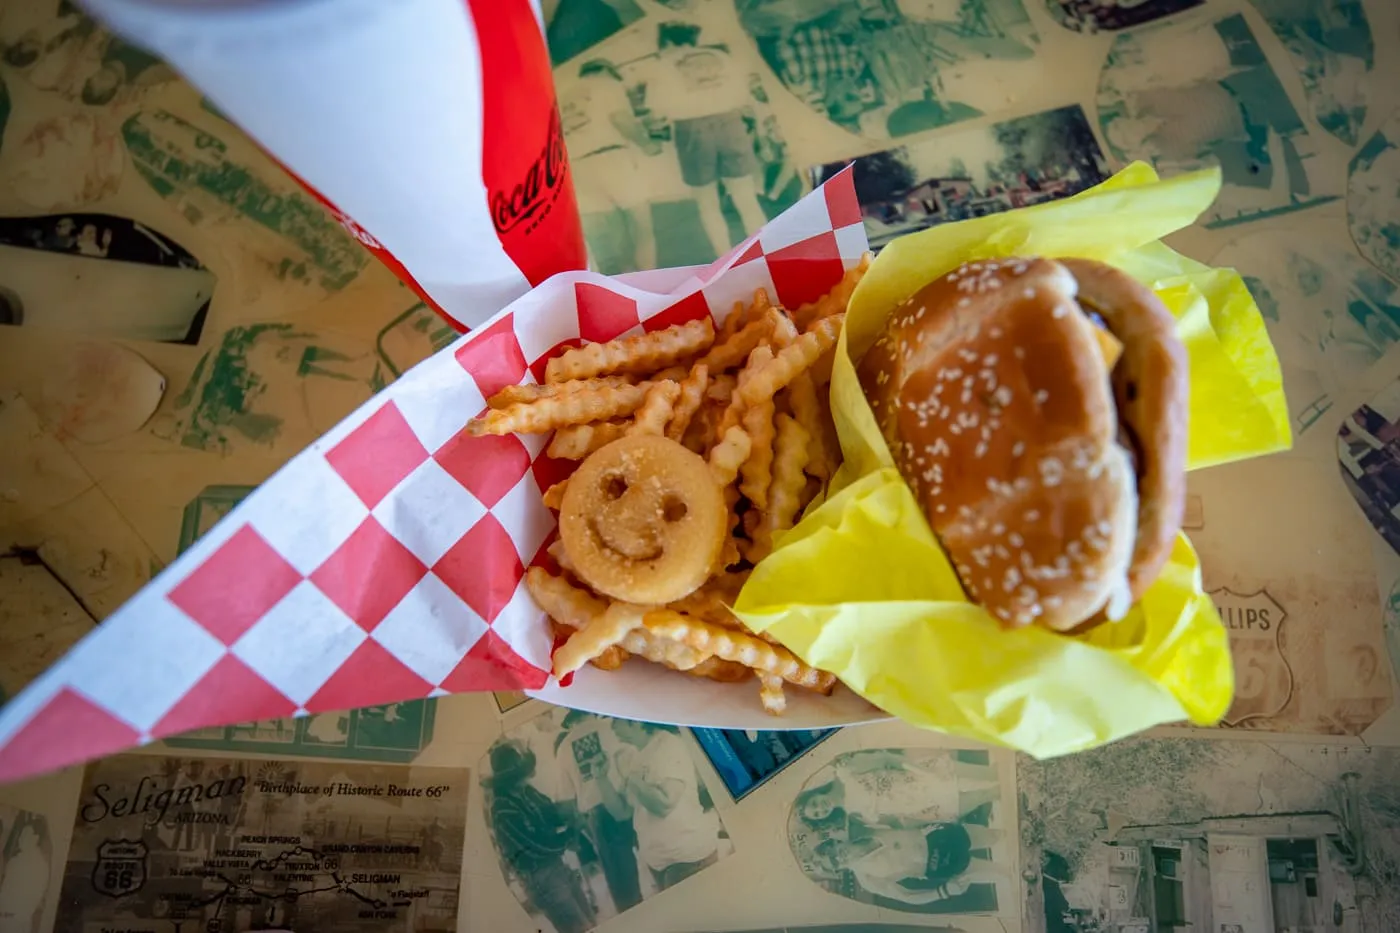 Cheeseburger with cheese, fries, a Smiles face fry, and a chocolate milkshake at Delgadillo’s Snow Cap in Seligman, Arizona - Route 66 restaurant and Drive-In Diner